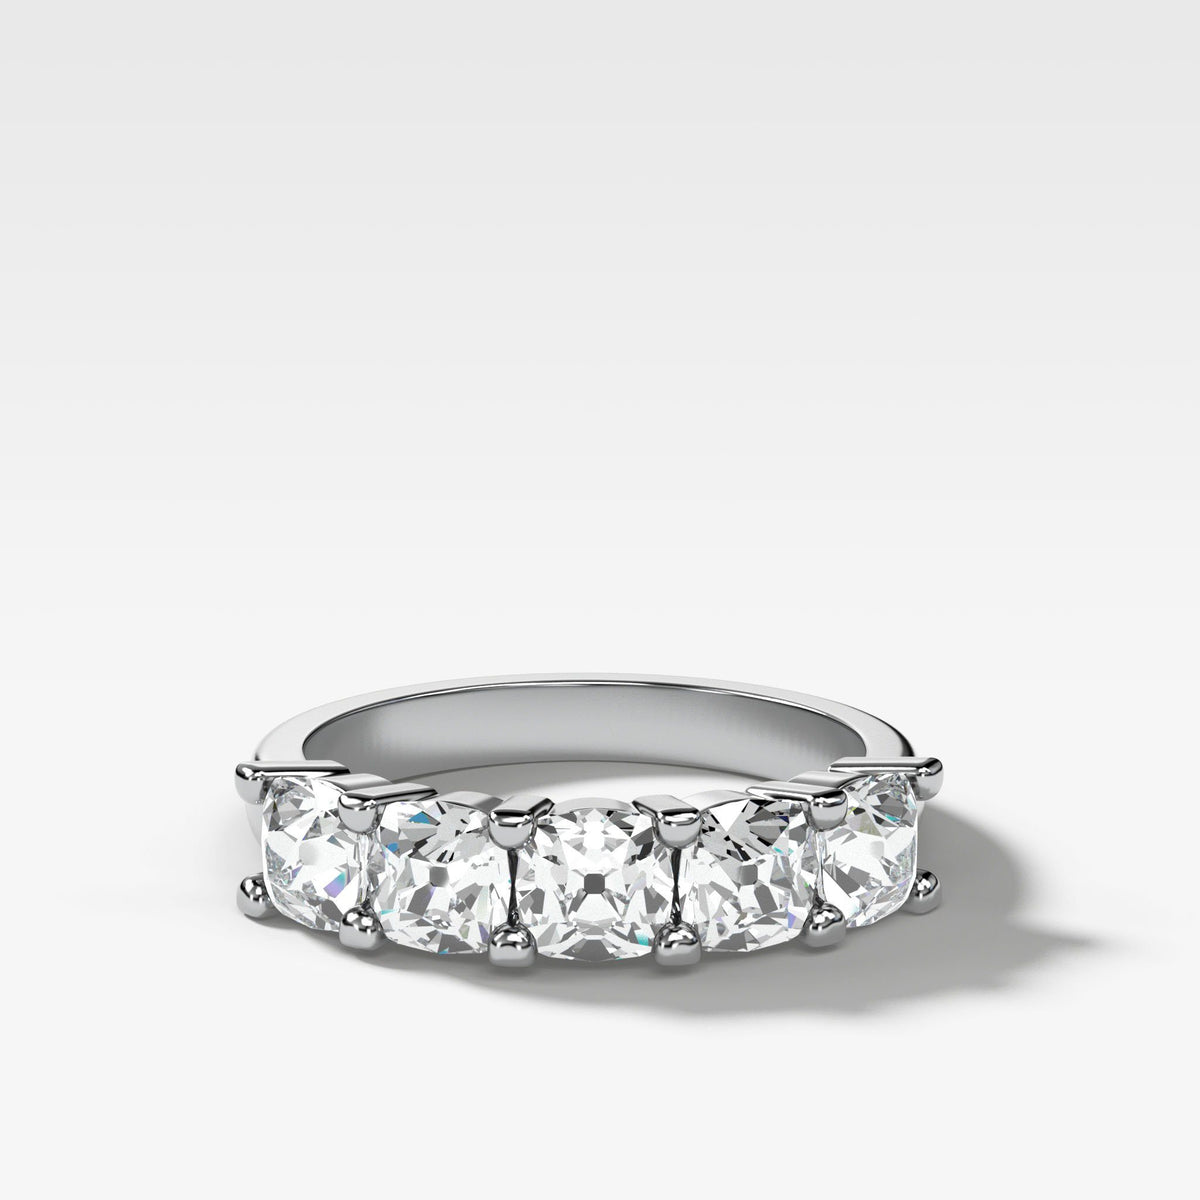 Five Stone Shared Prong Diamond Band With Old Mine Cuts (1.65ctw) by Good Stone in White Gold